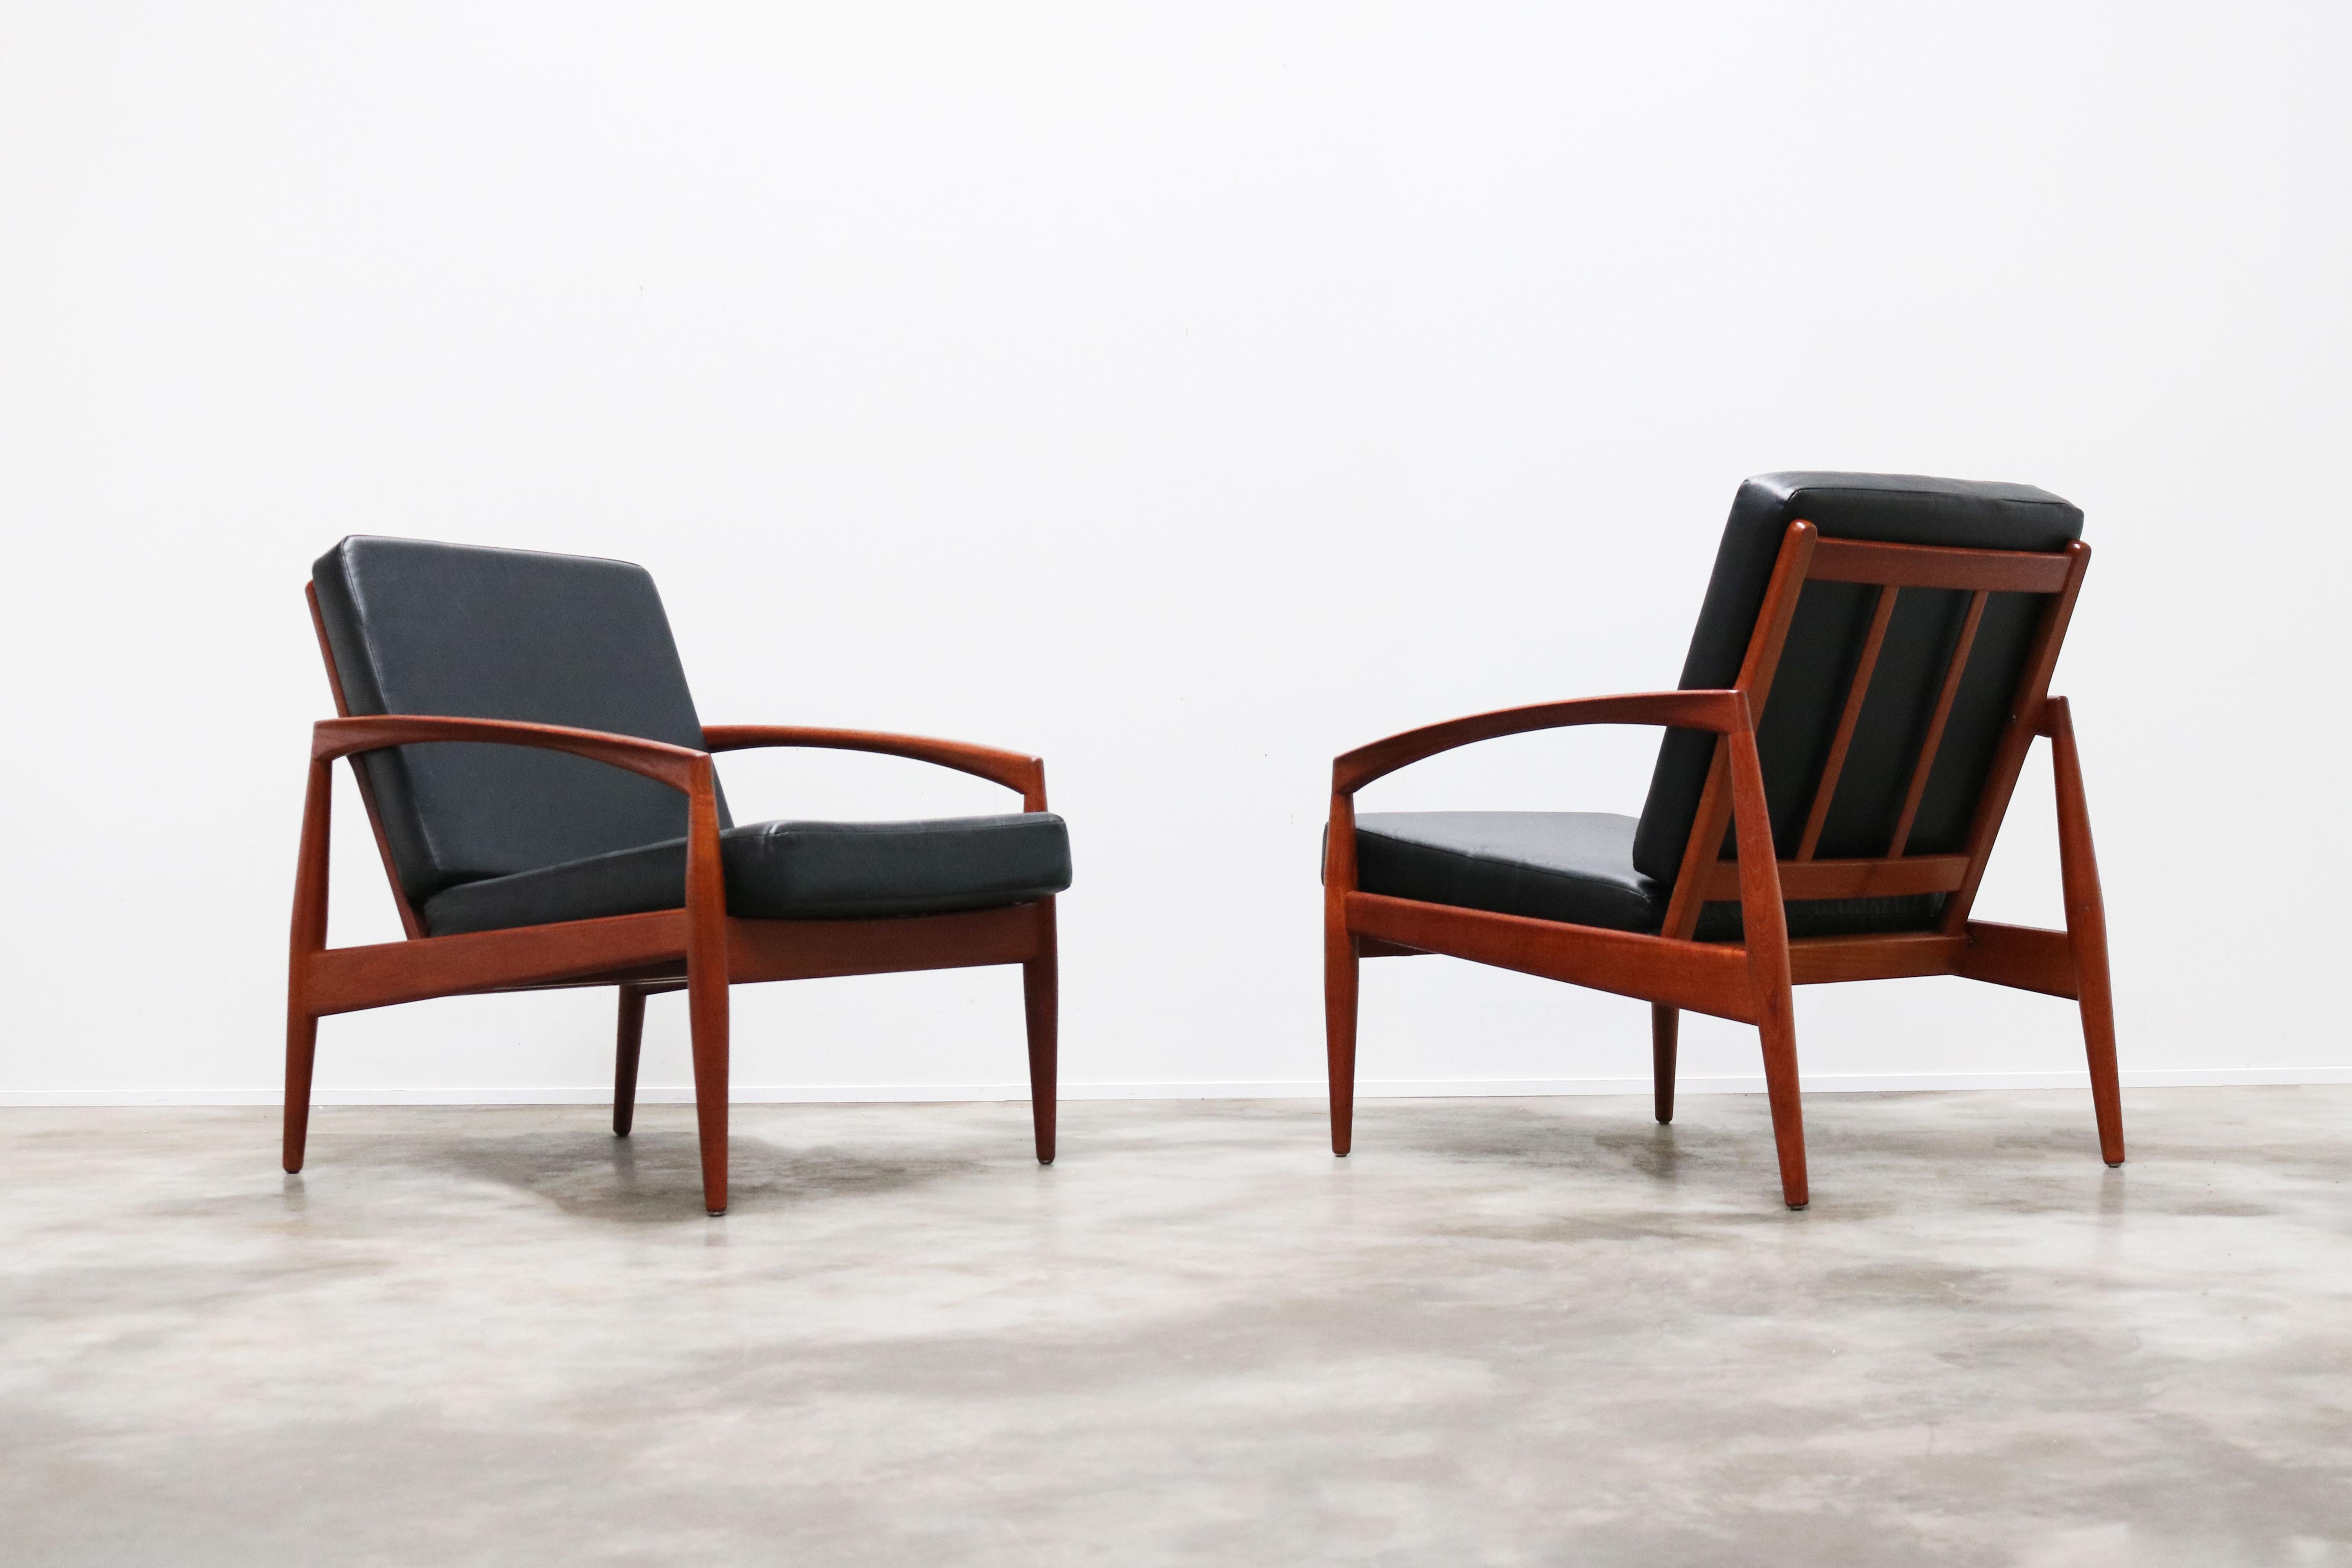 Rare pair of 'Paper Knife' model 121 lounge chairs in teak and black leather (faux) design by Kai Kristiansen for Magnus Olesen in 1955. 
Gorgeous organic design style sculpted in solid teak.
Very comfortable chairs and true design classics.
Both